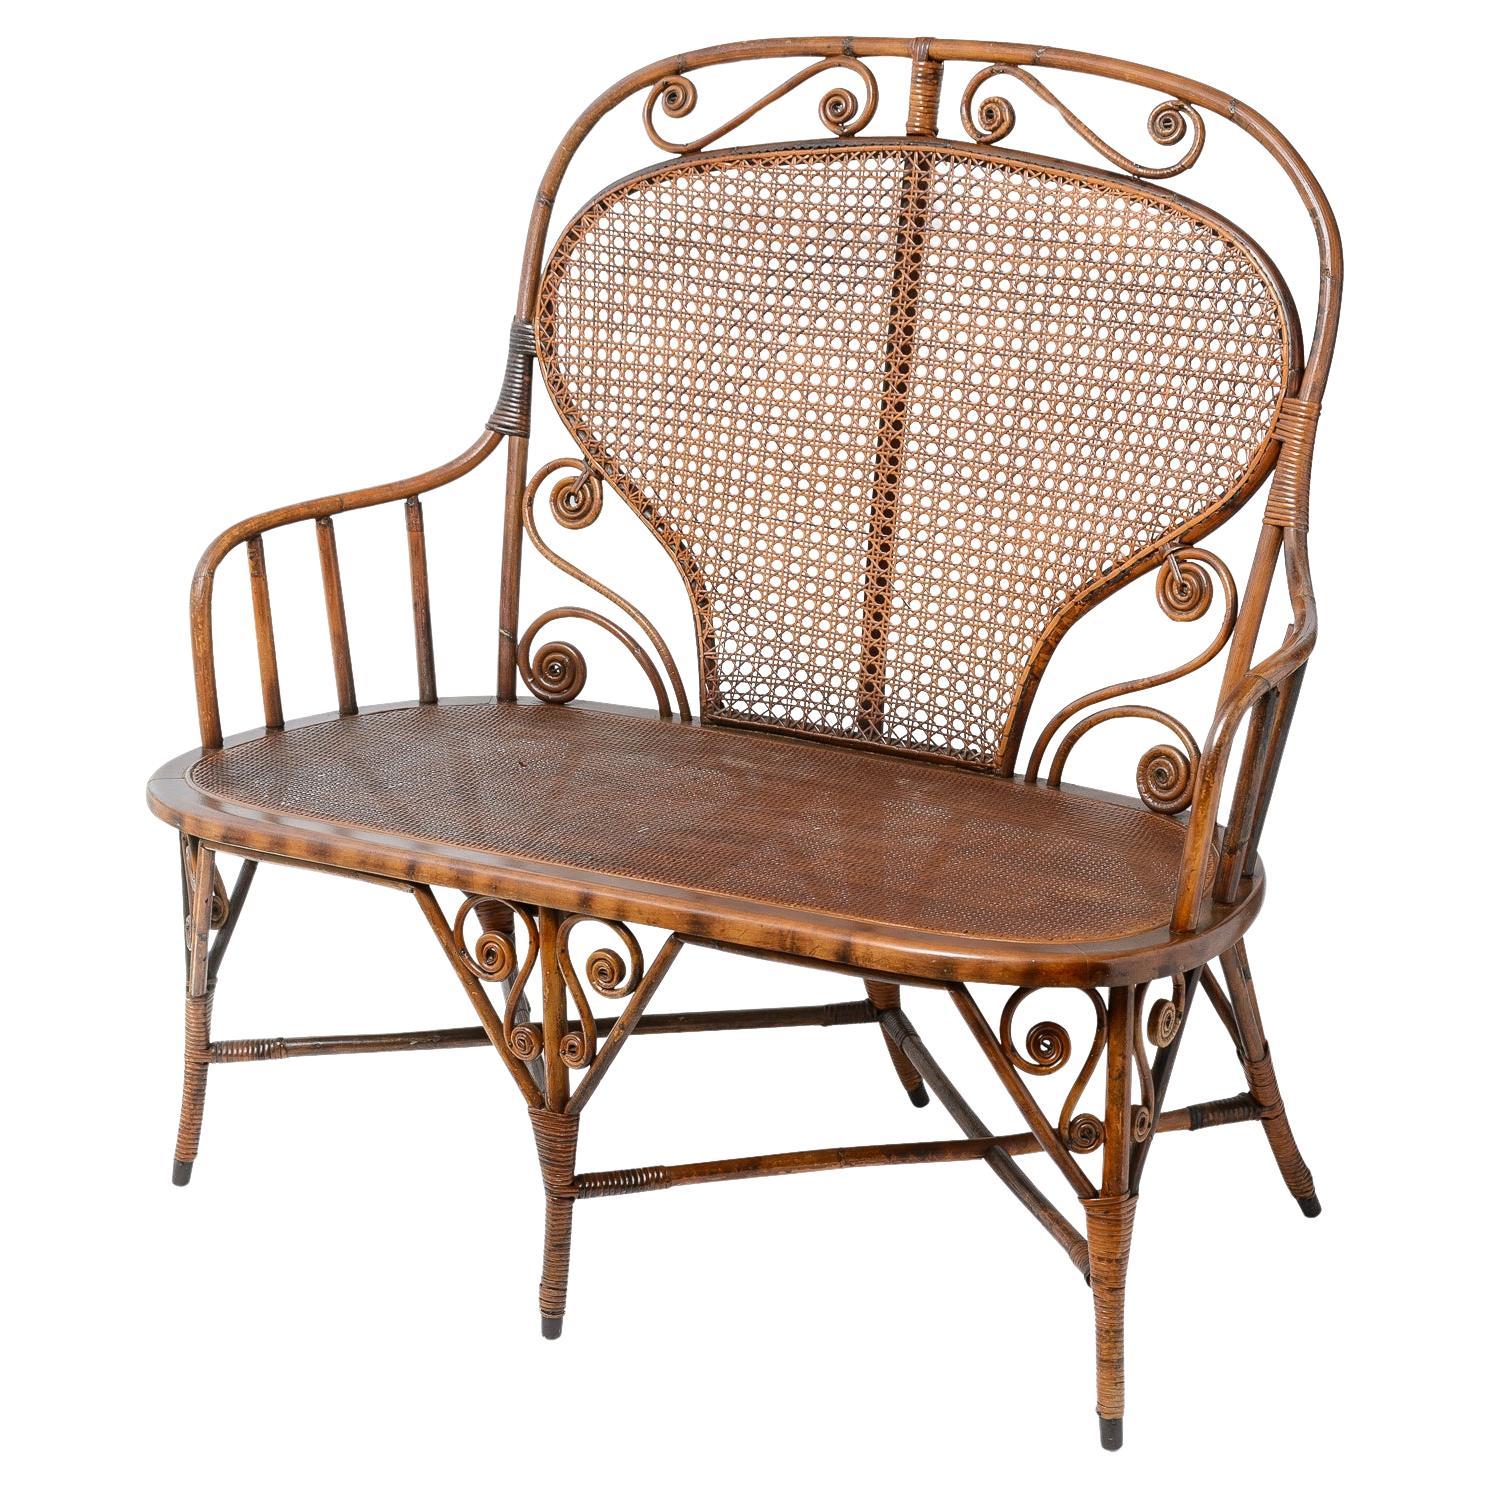 Antique Bentwood & Cane Settee, Attributed to Michael Thonet, C1900-1920s For Sale